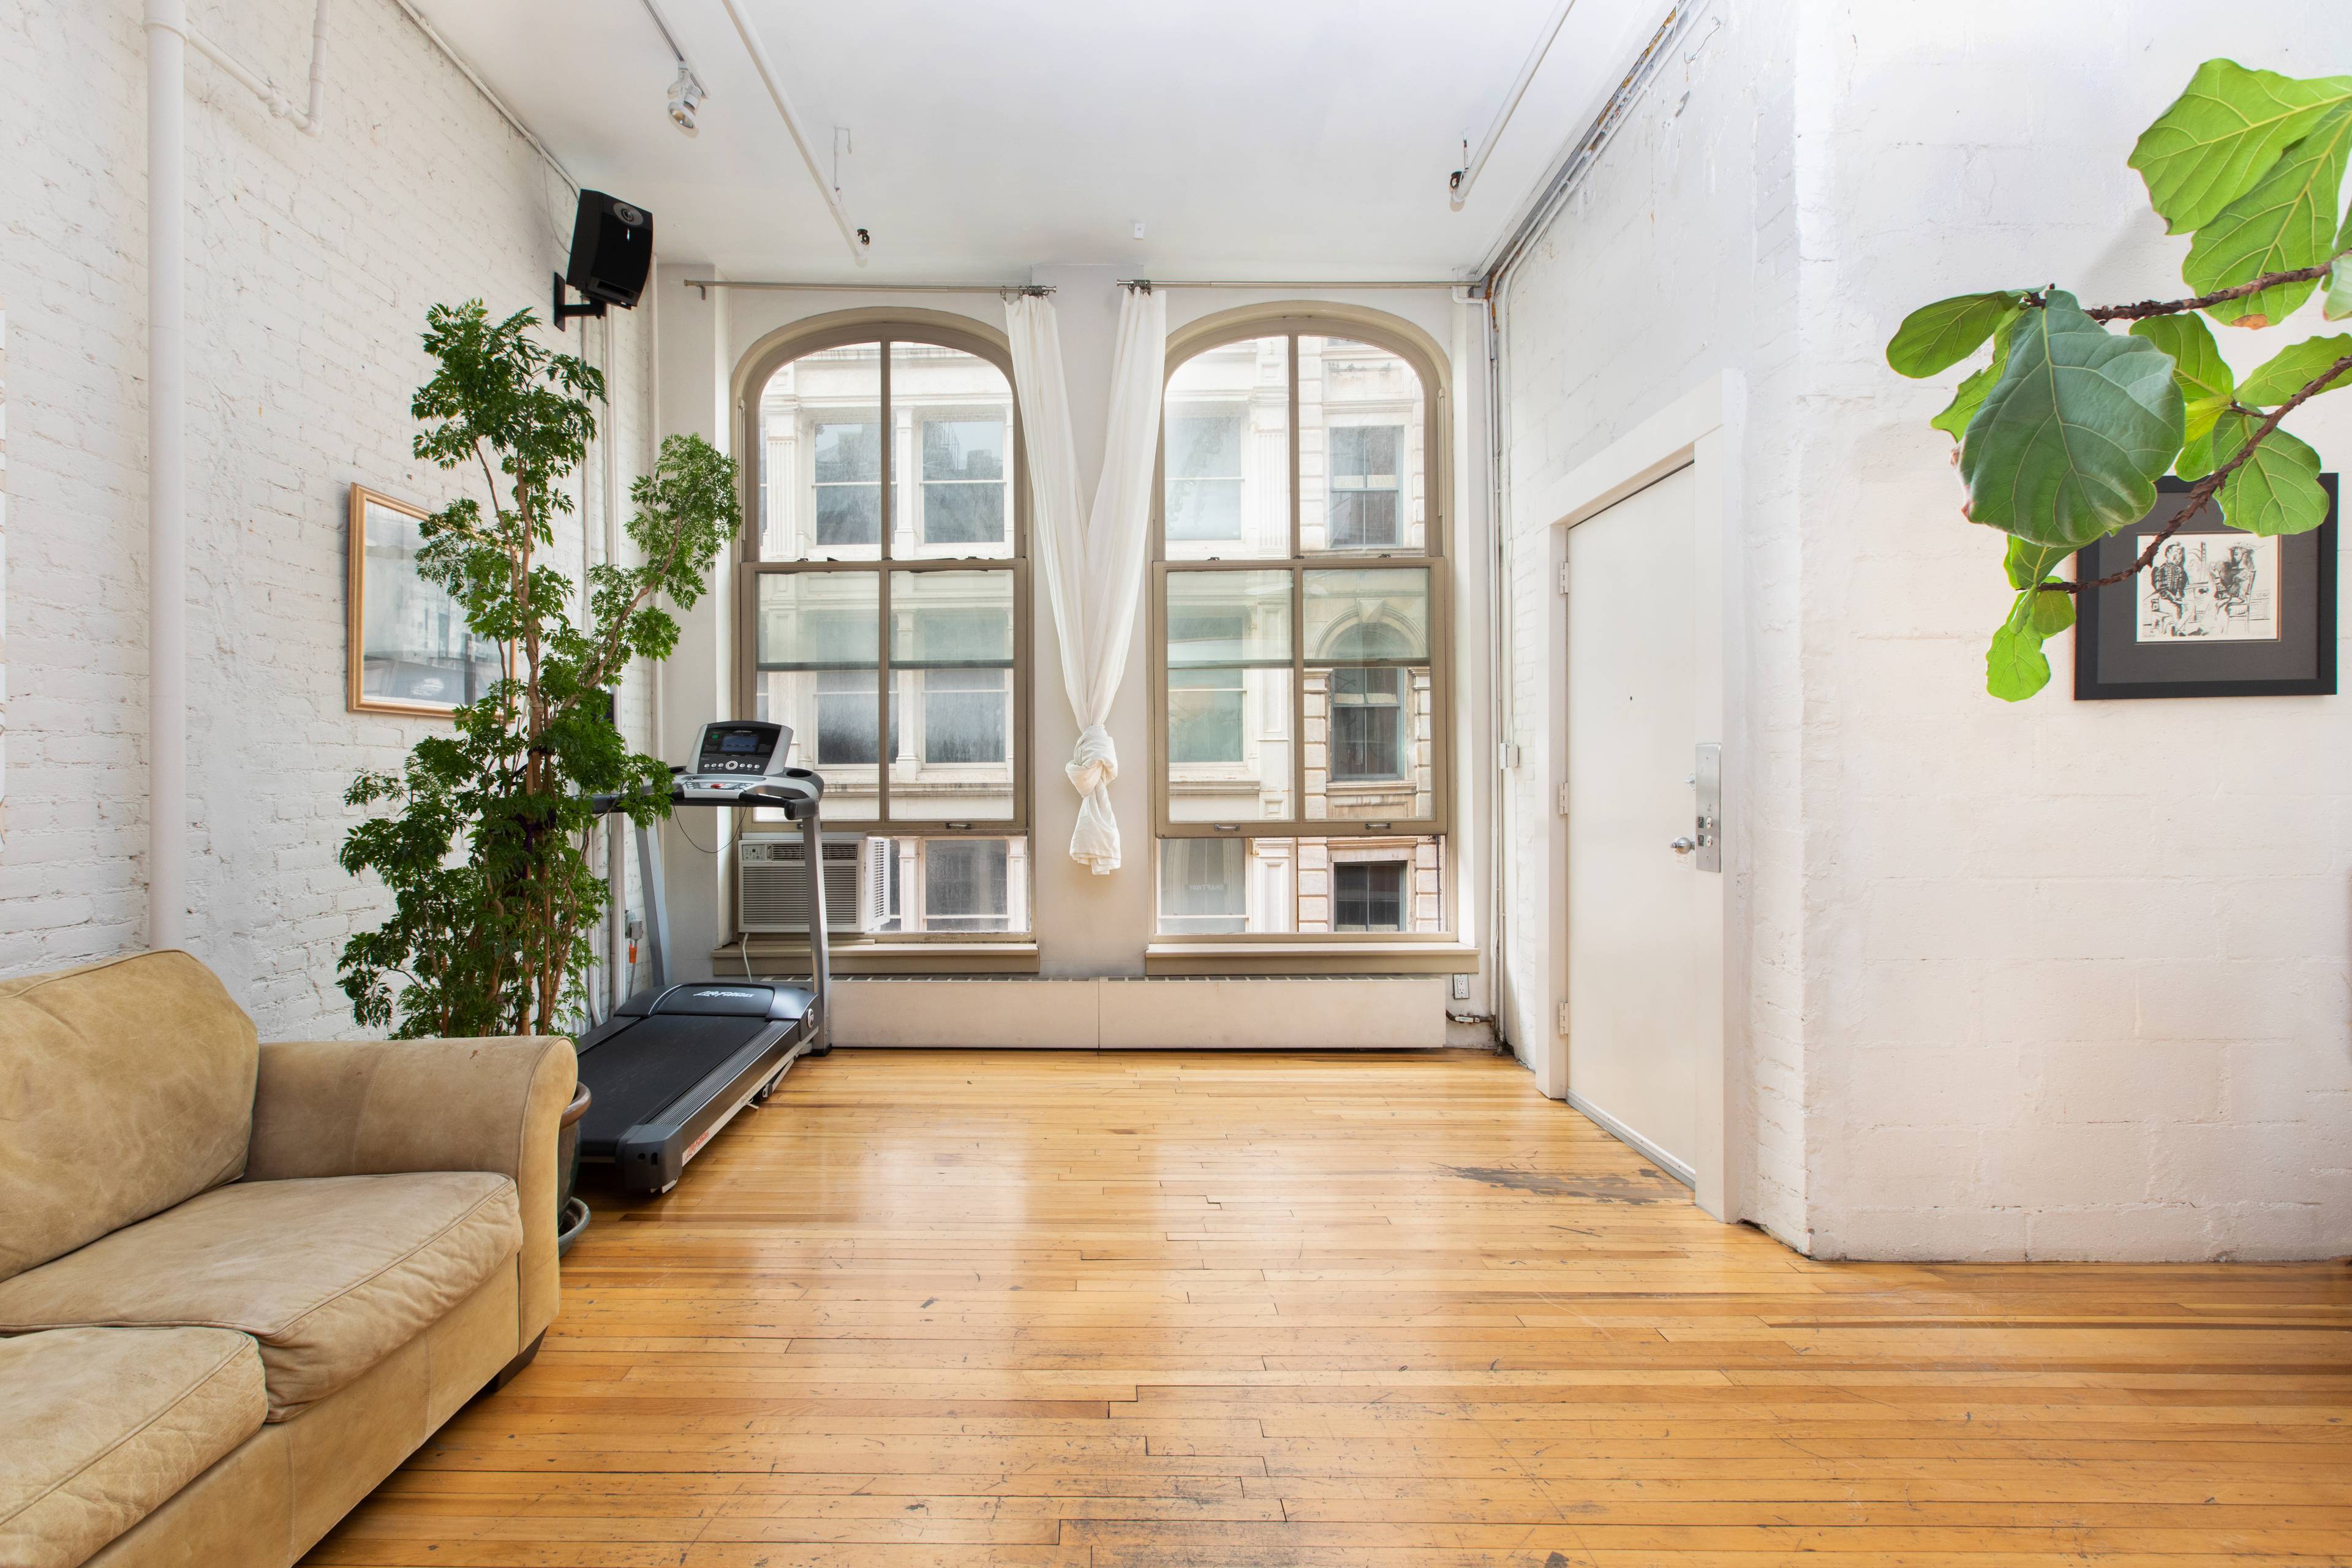 Rare opportunity to combine 2 authentic artist lofts located in a boutique 1915 Cast Iron building, in the heart of Soho, on magical cobblestone street Mercer Street.